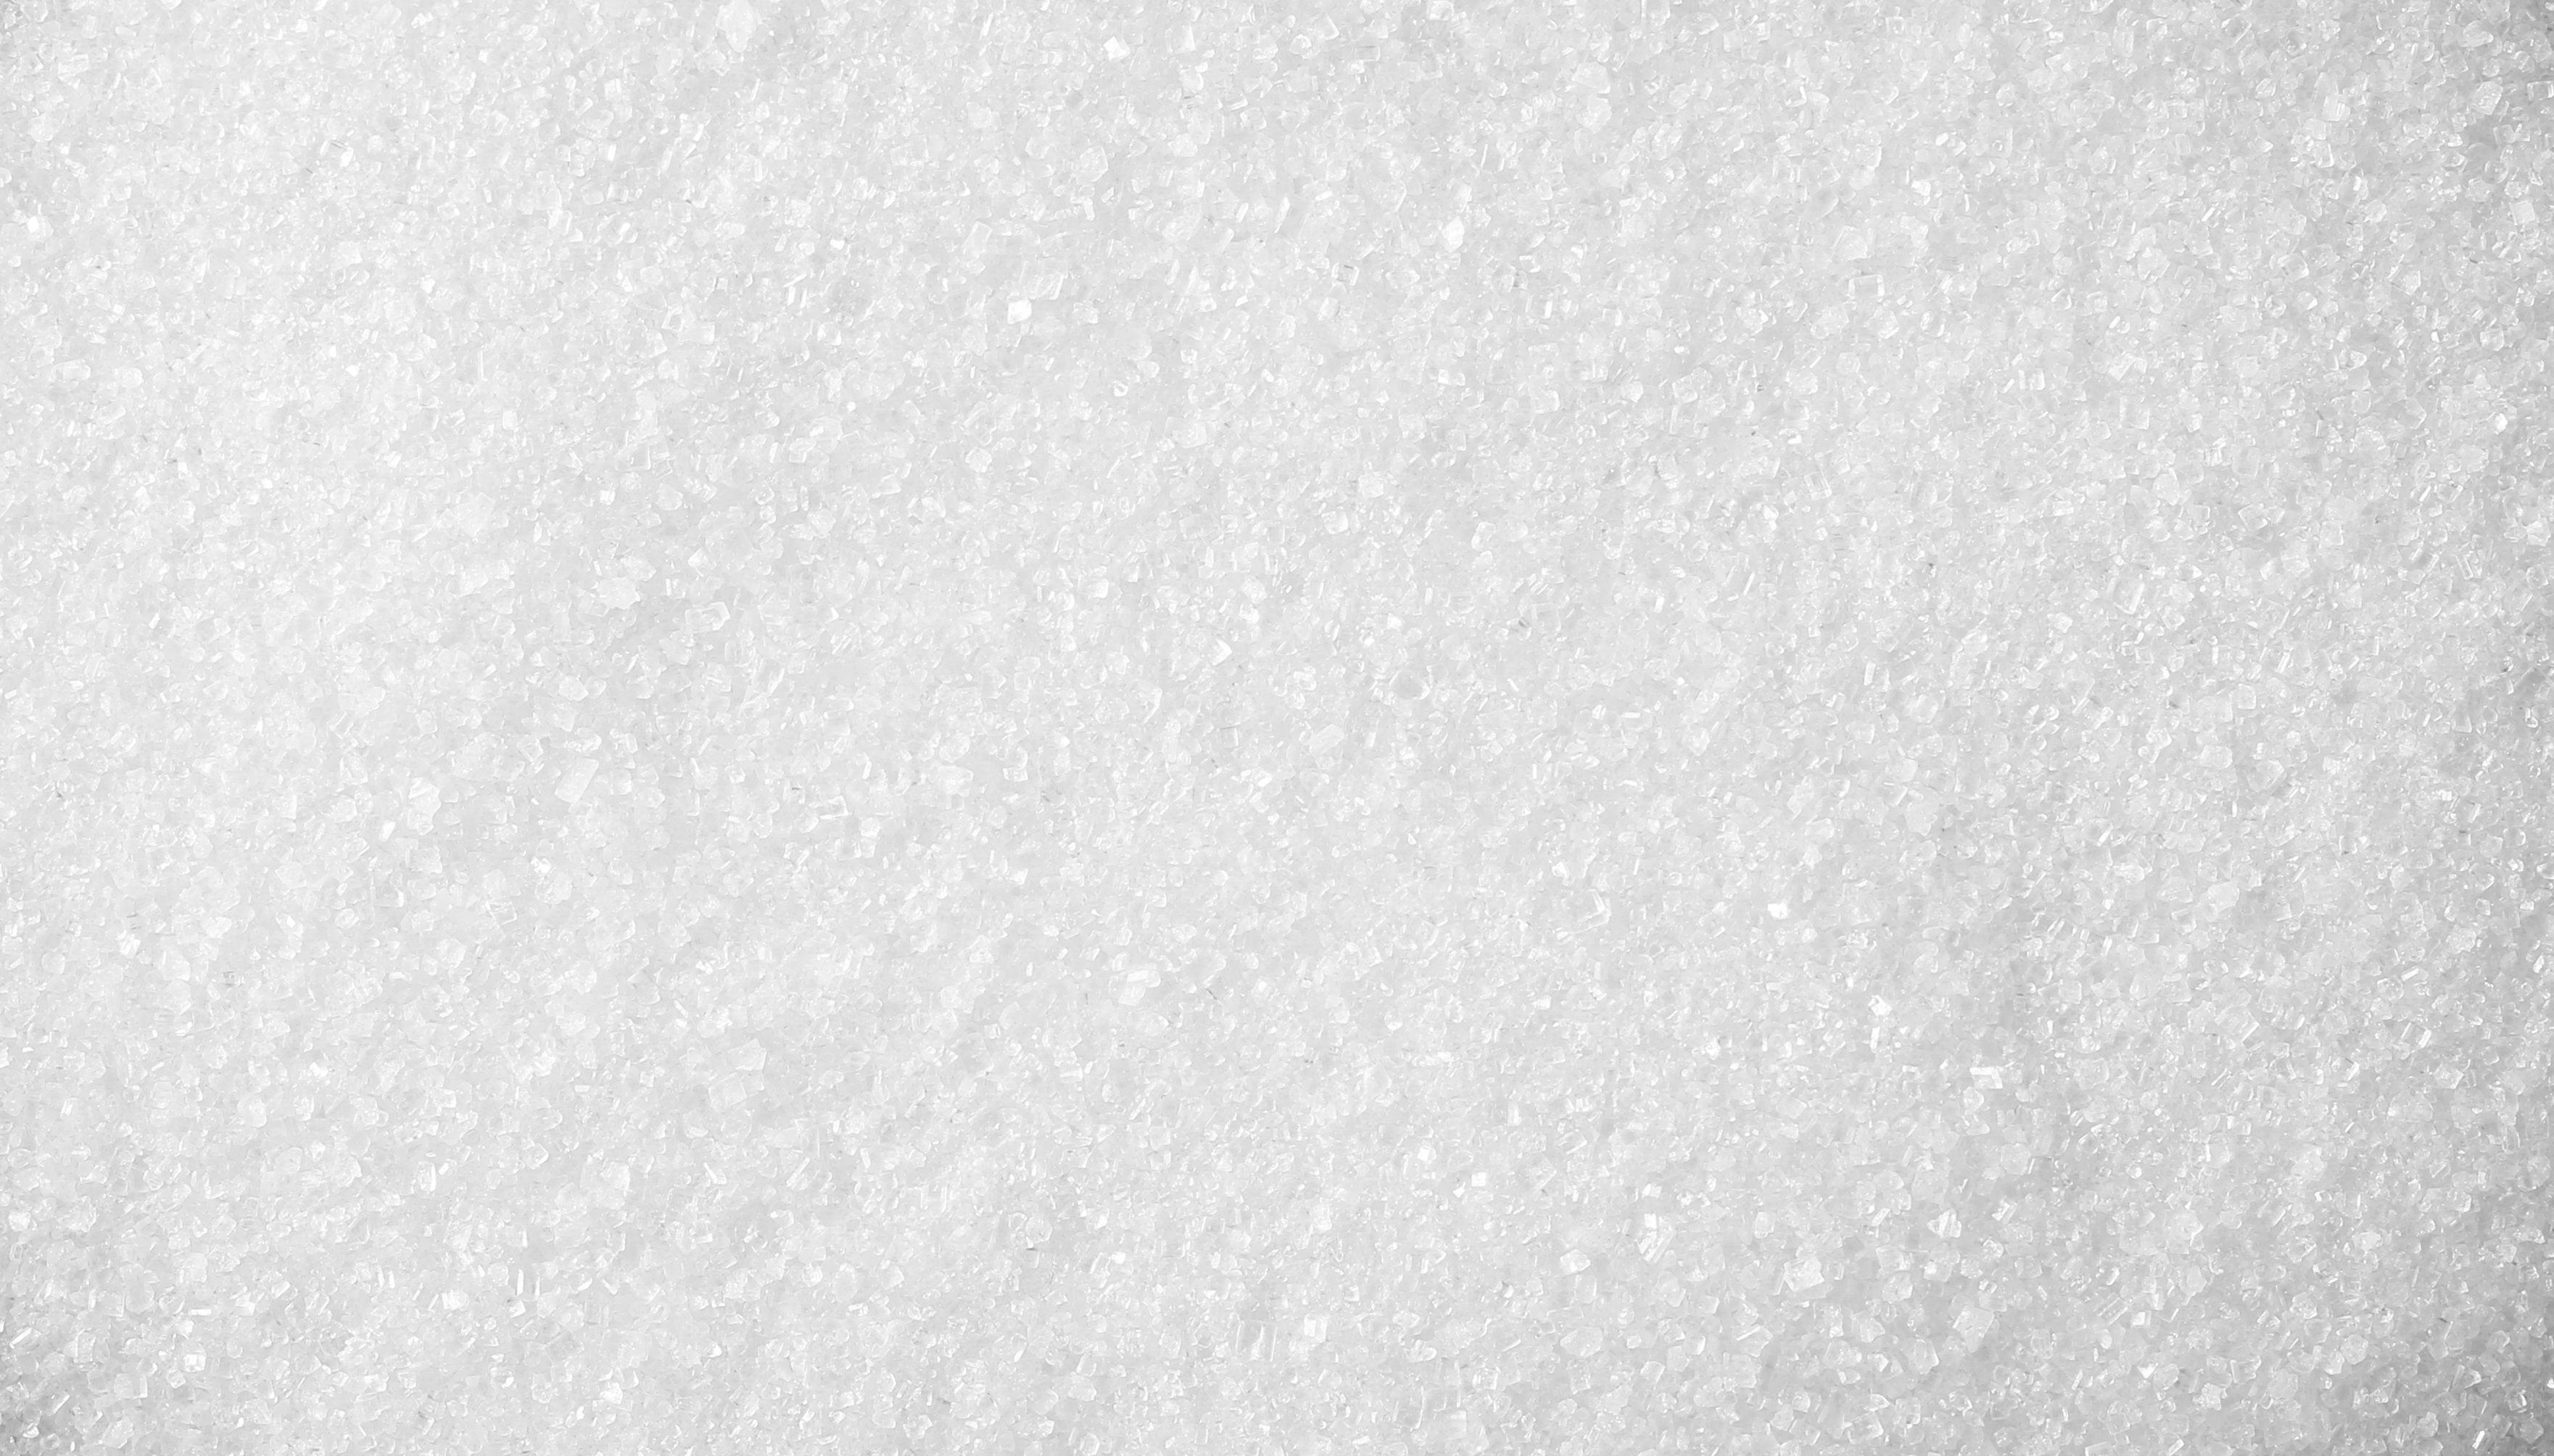 Sugar crystals pile background and texture | Image Credit: © dule964 - stock.adobe.com